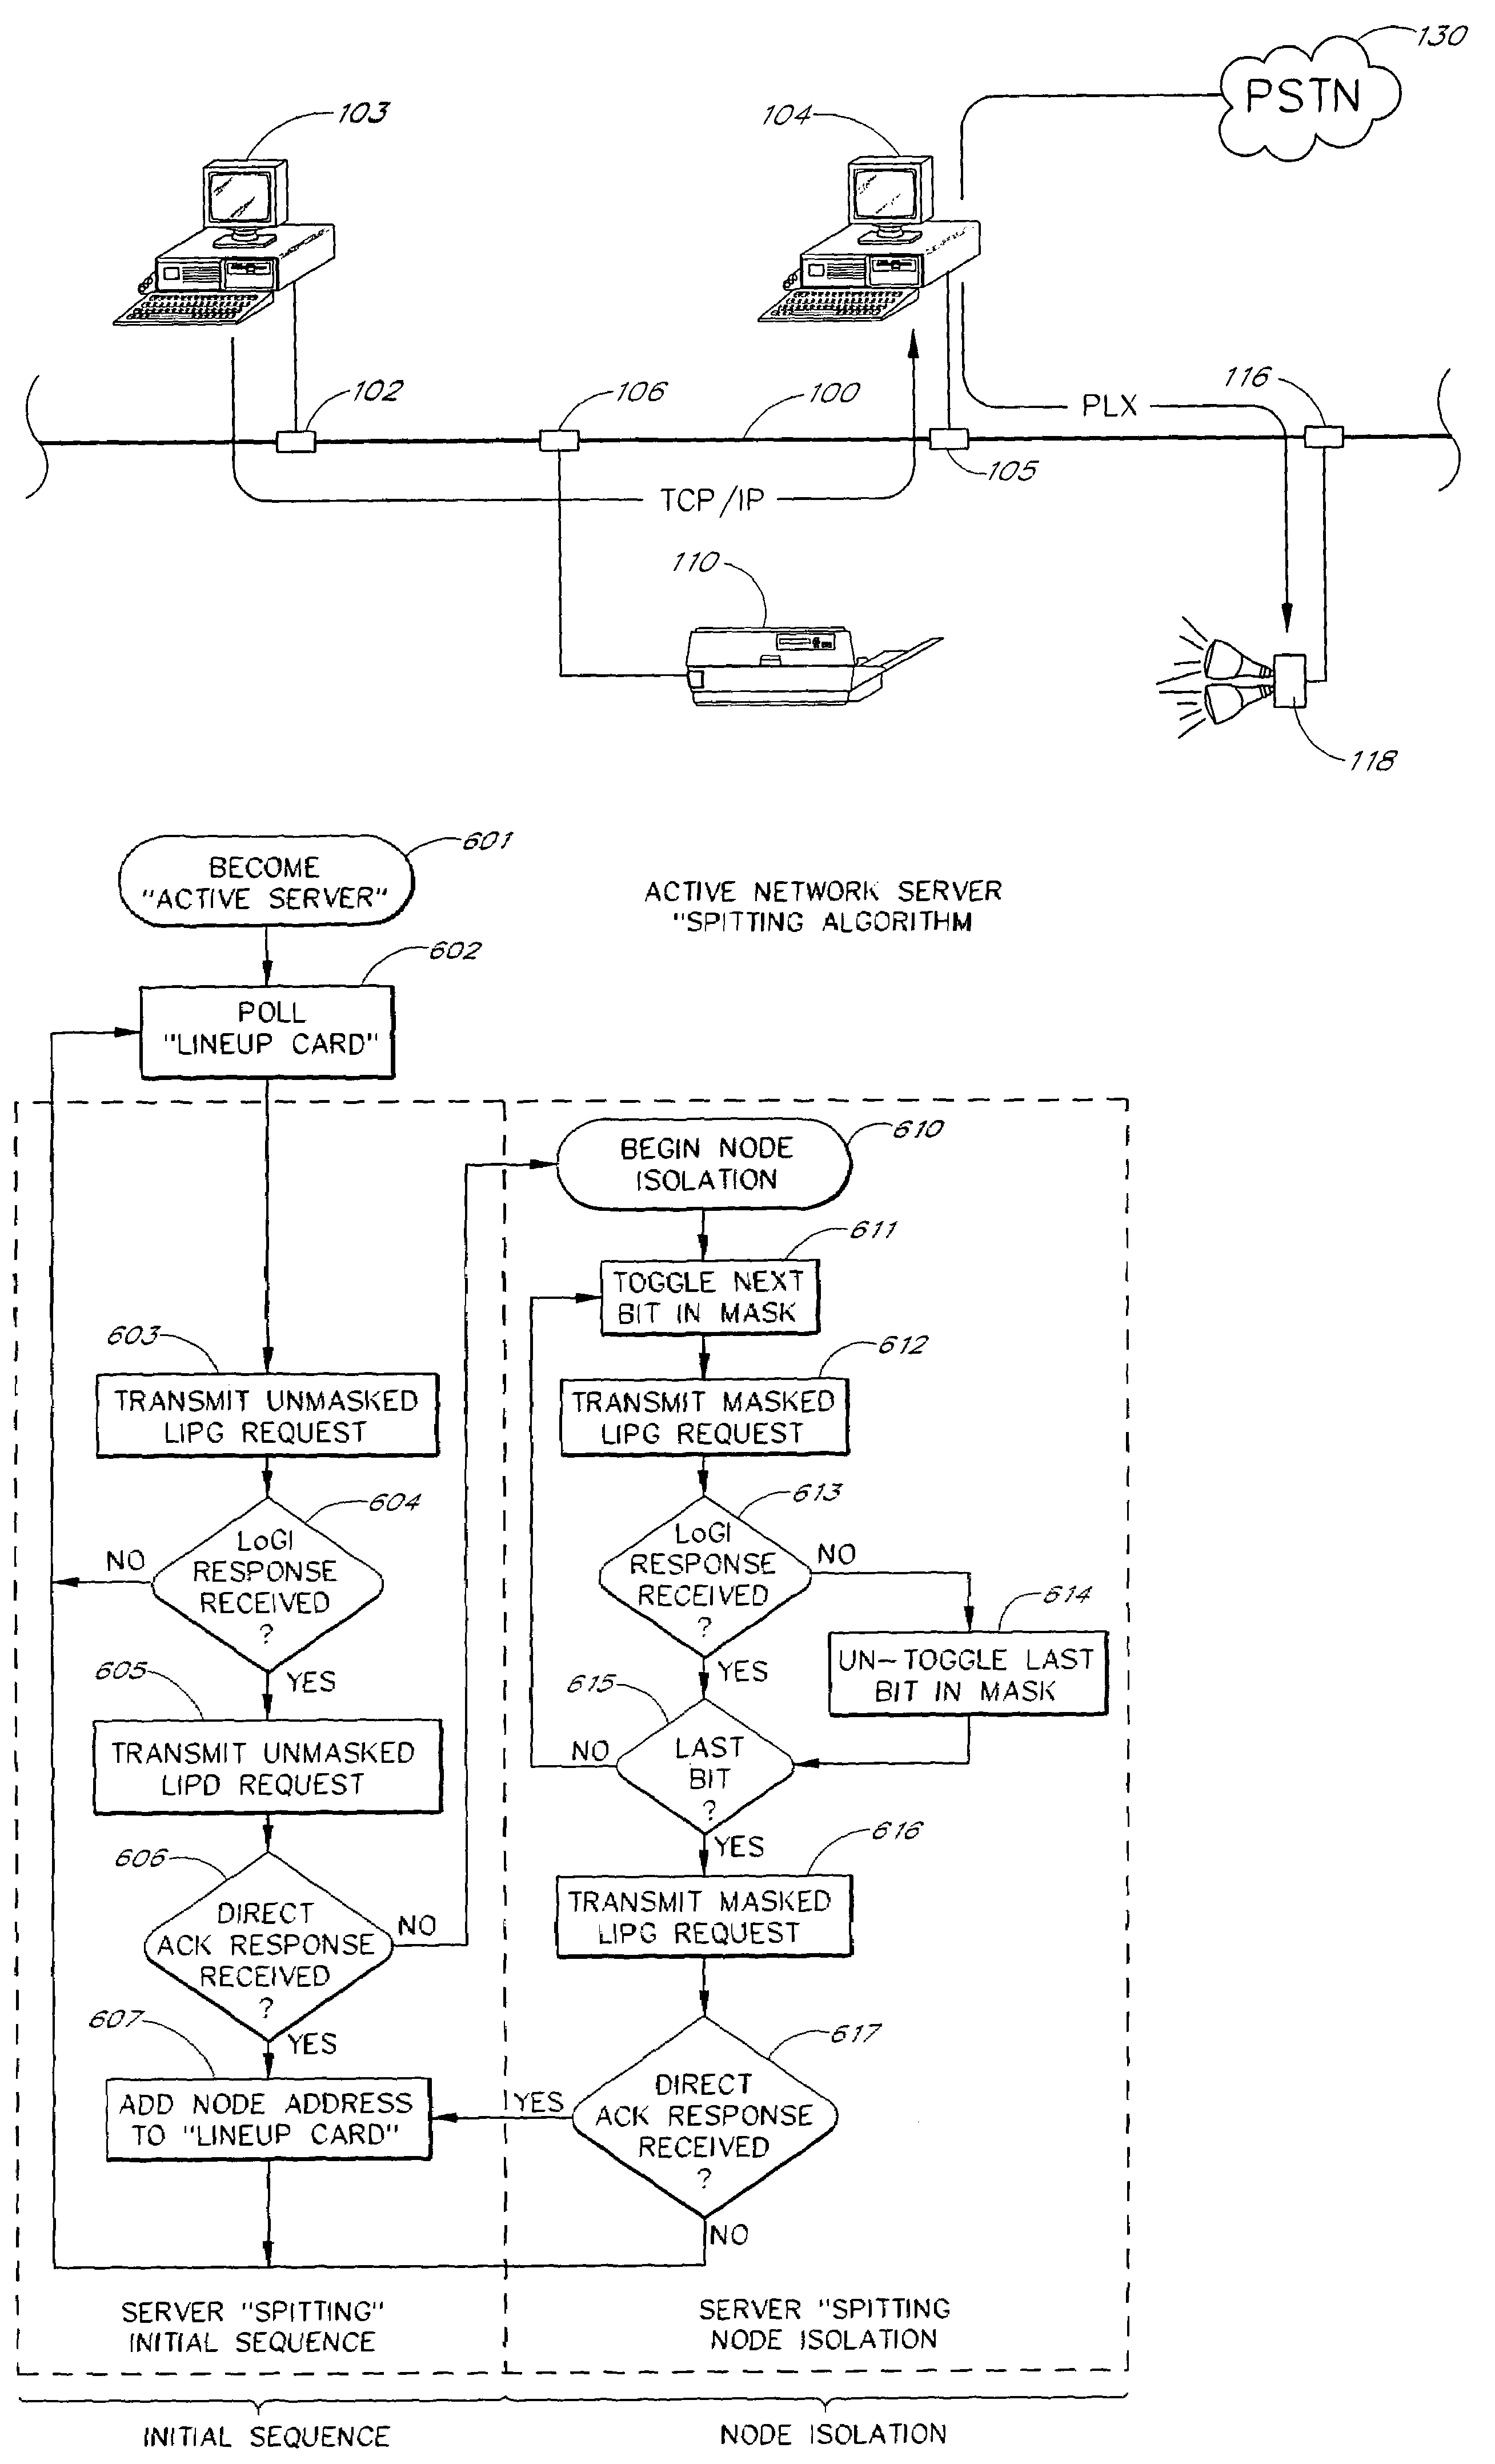 Multi-channel power line exchange protocol